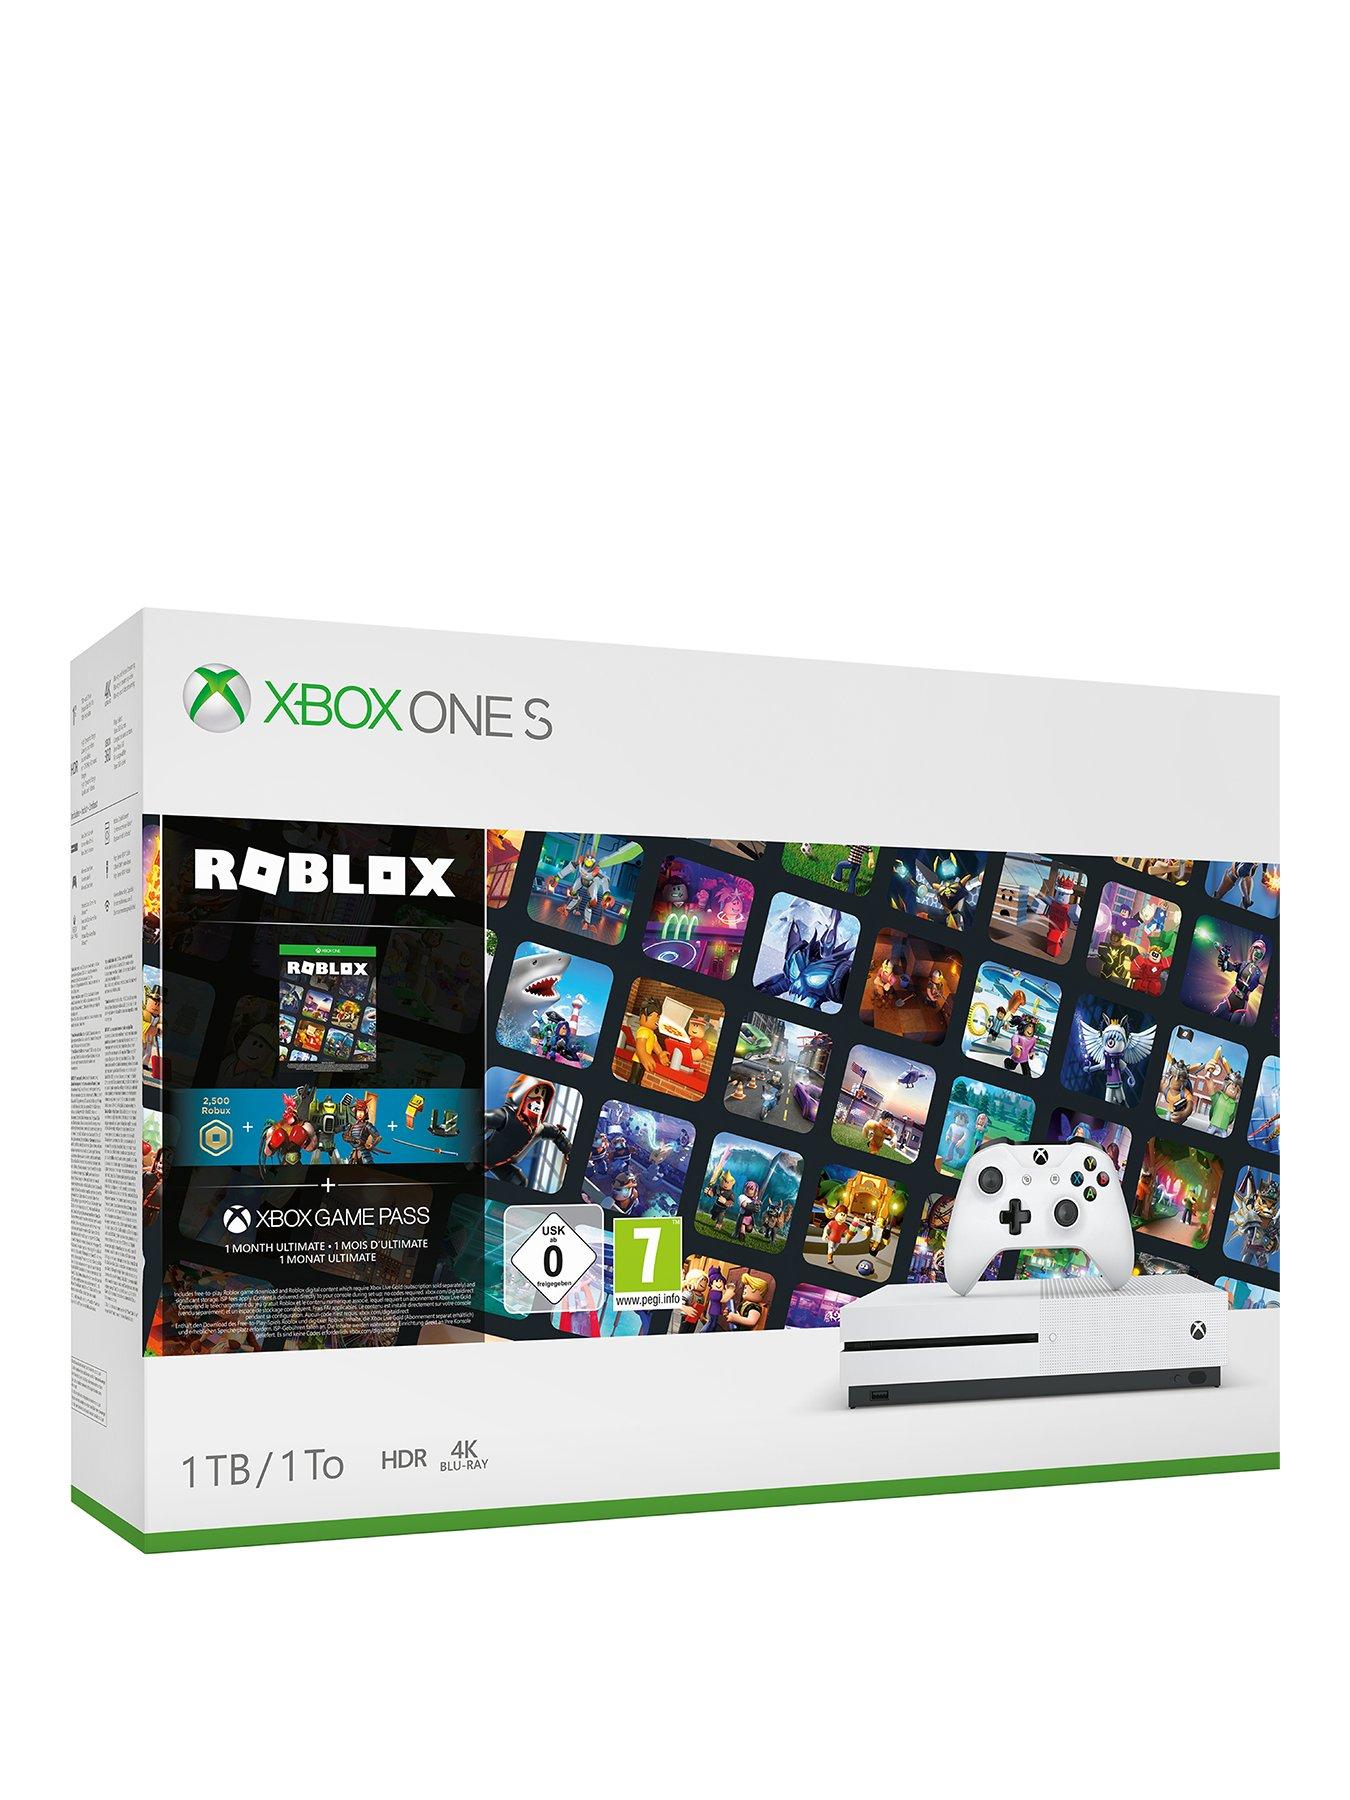 Xbox One S With Roblox Bundle And Optional Extras 1tb Console - xbox one s roblox bundle review